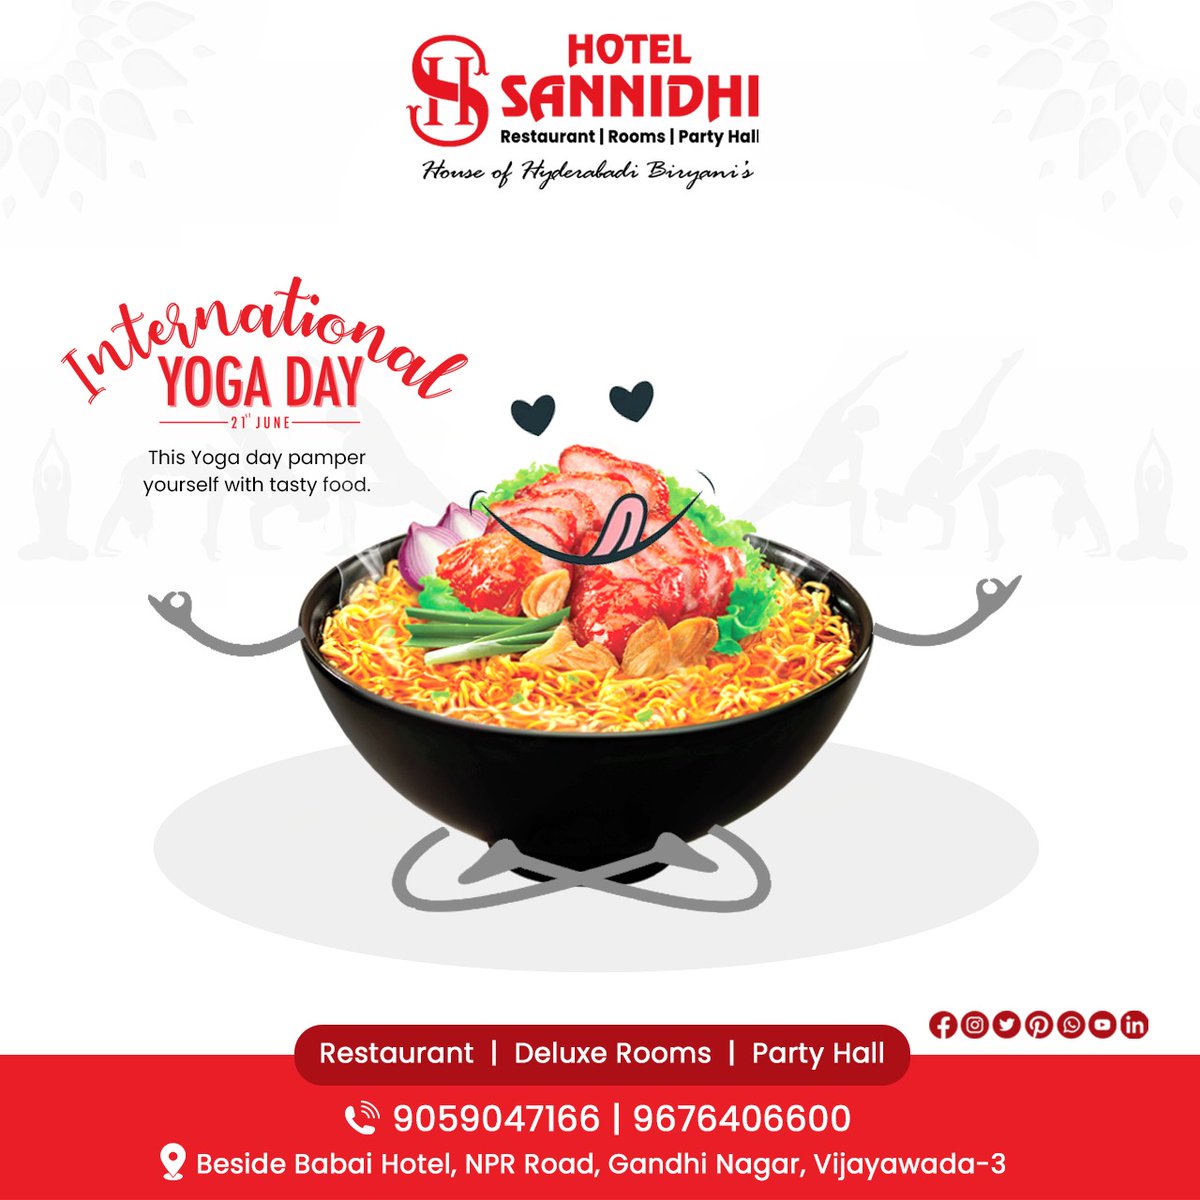 This Yoga day pamper yourself with tasty food....
International day of Yoga....
#Sannidhi #hotels #besthotels #budgethotels #comfortablestay #hotels #bestdeals #comfortable #stay #comfortable #journey #vijayawada #bestrestaurant #yogaday #yogaday2023 #yogadaywishes